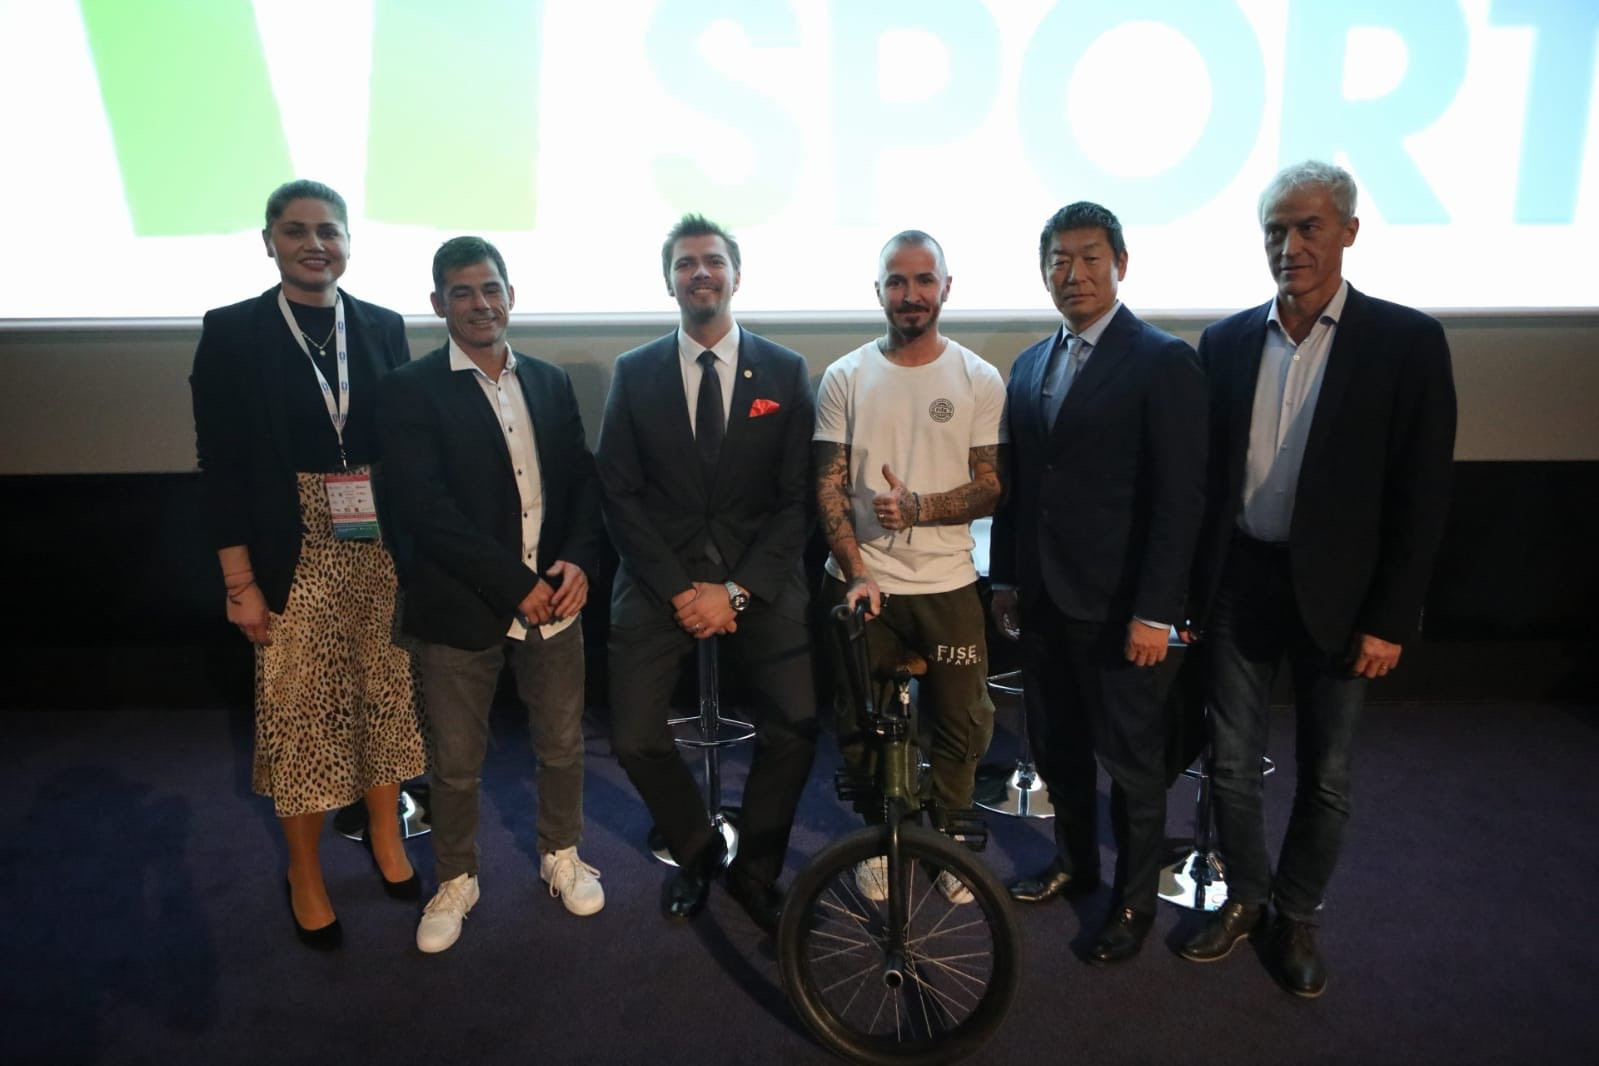 A number of debates took place thoughout the day, including one on urban sports ©Peace and Sport